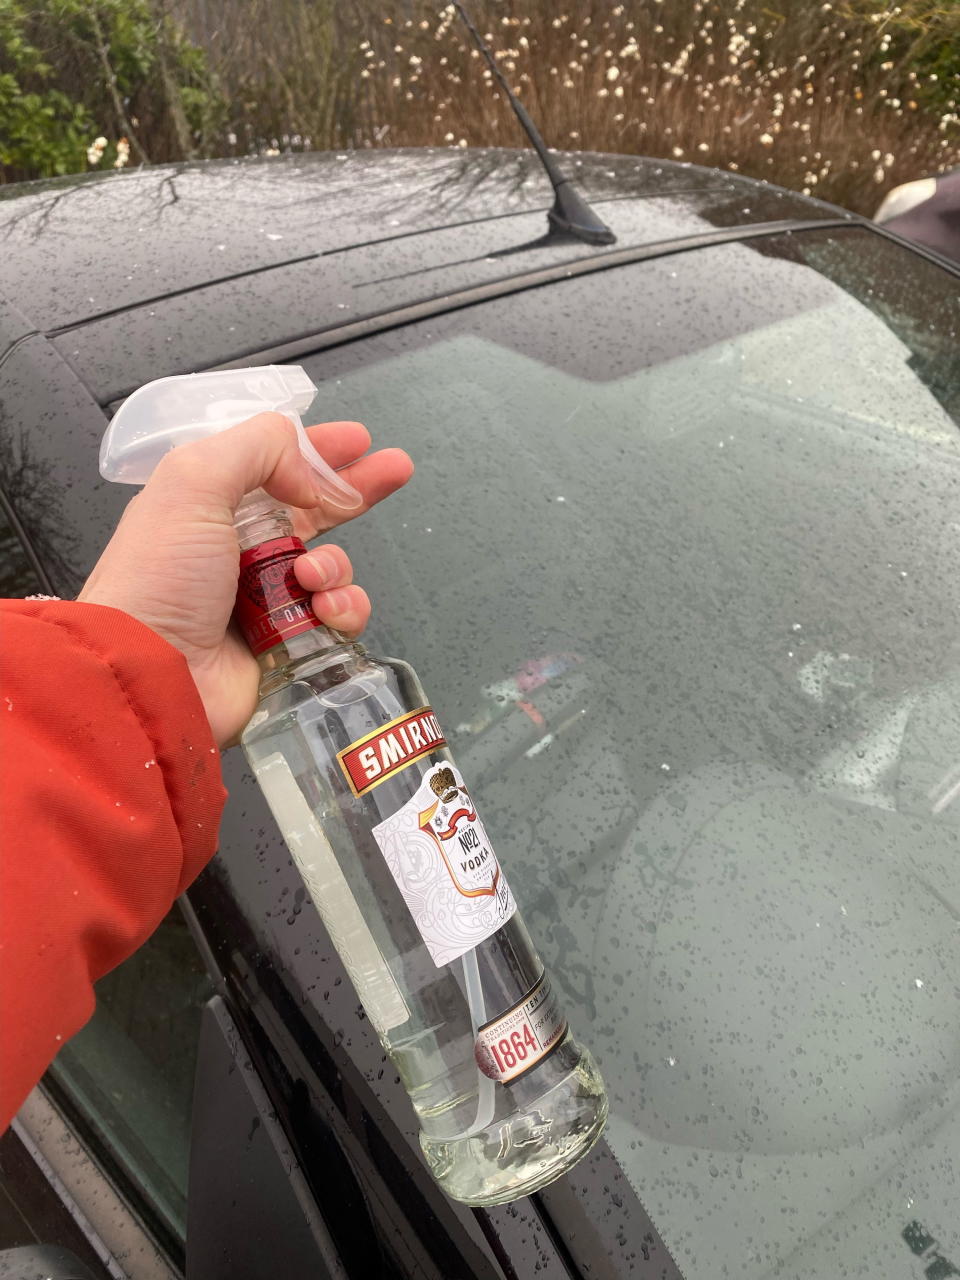 Jack Mentiply pouring vodka on his windscreen, to prevent it from icing up. See SWNS story SWNJhacks. A man has shown a hack how to prevent your car windscreen from icing up - using a bottle of VODKA. Jack Mentiply, reckons he has found the perfect solution to icy car windscreens in the winter months. The delivery driver from Albrough, Scotland, said pouring vodka on your windscreen and in your screen wash refill will do the trick. Jack shared a video demonstrating the simple hack - and claims any 